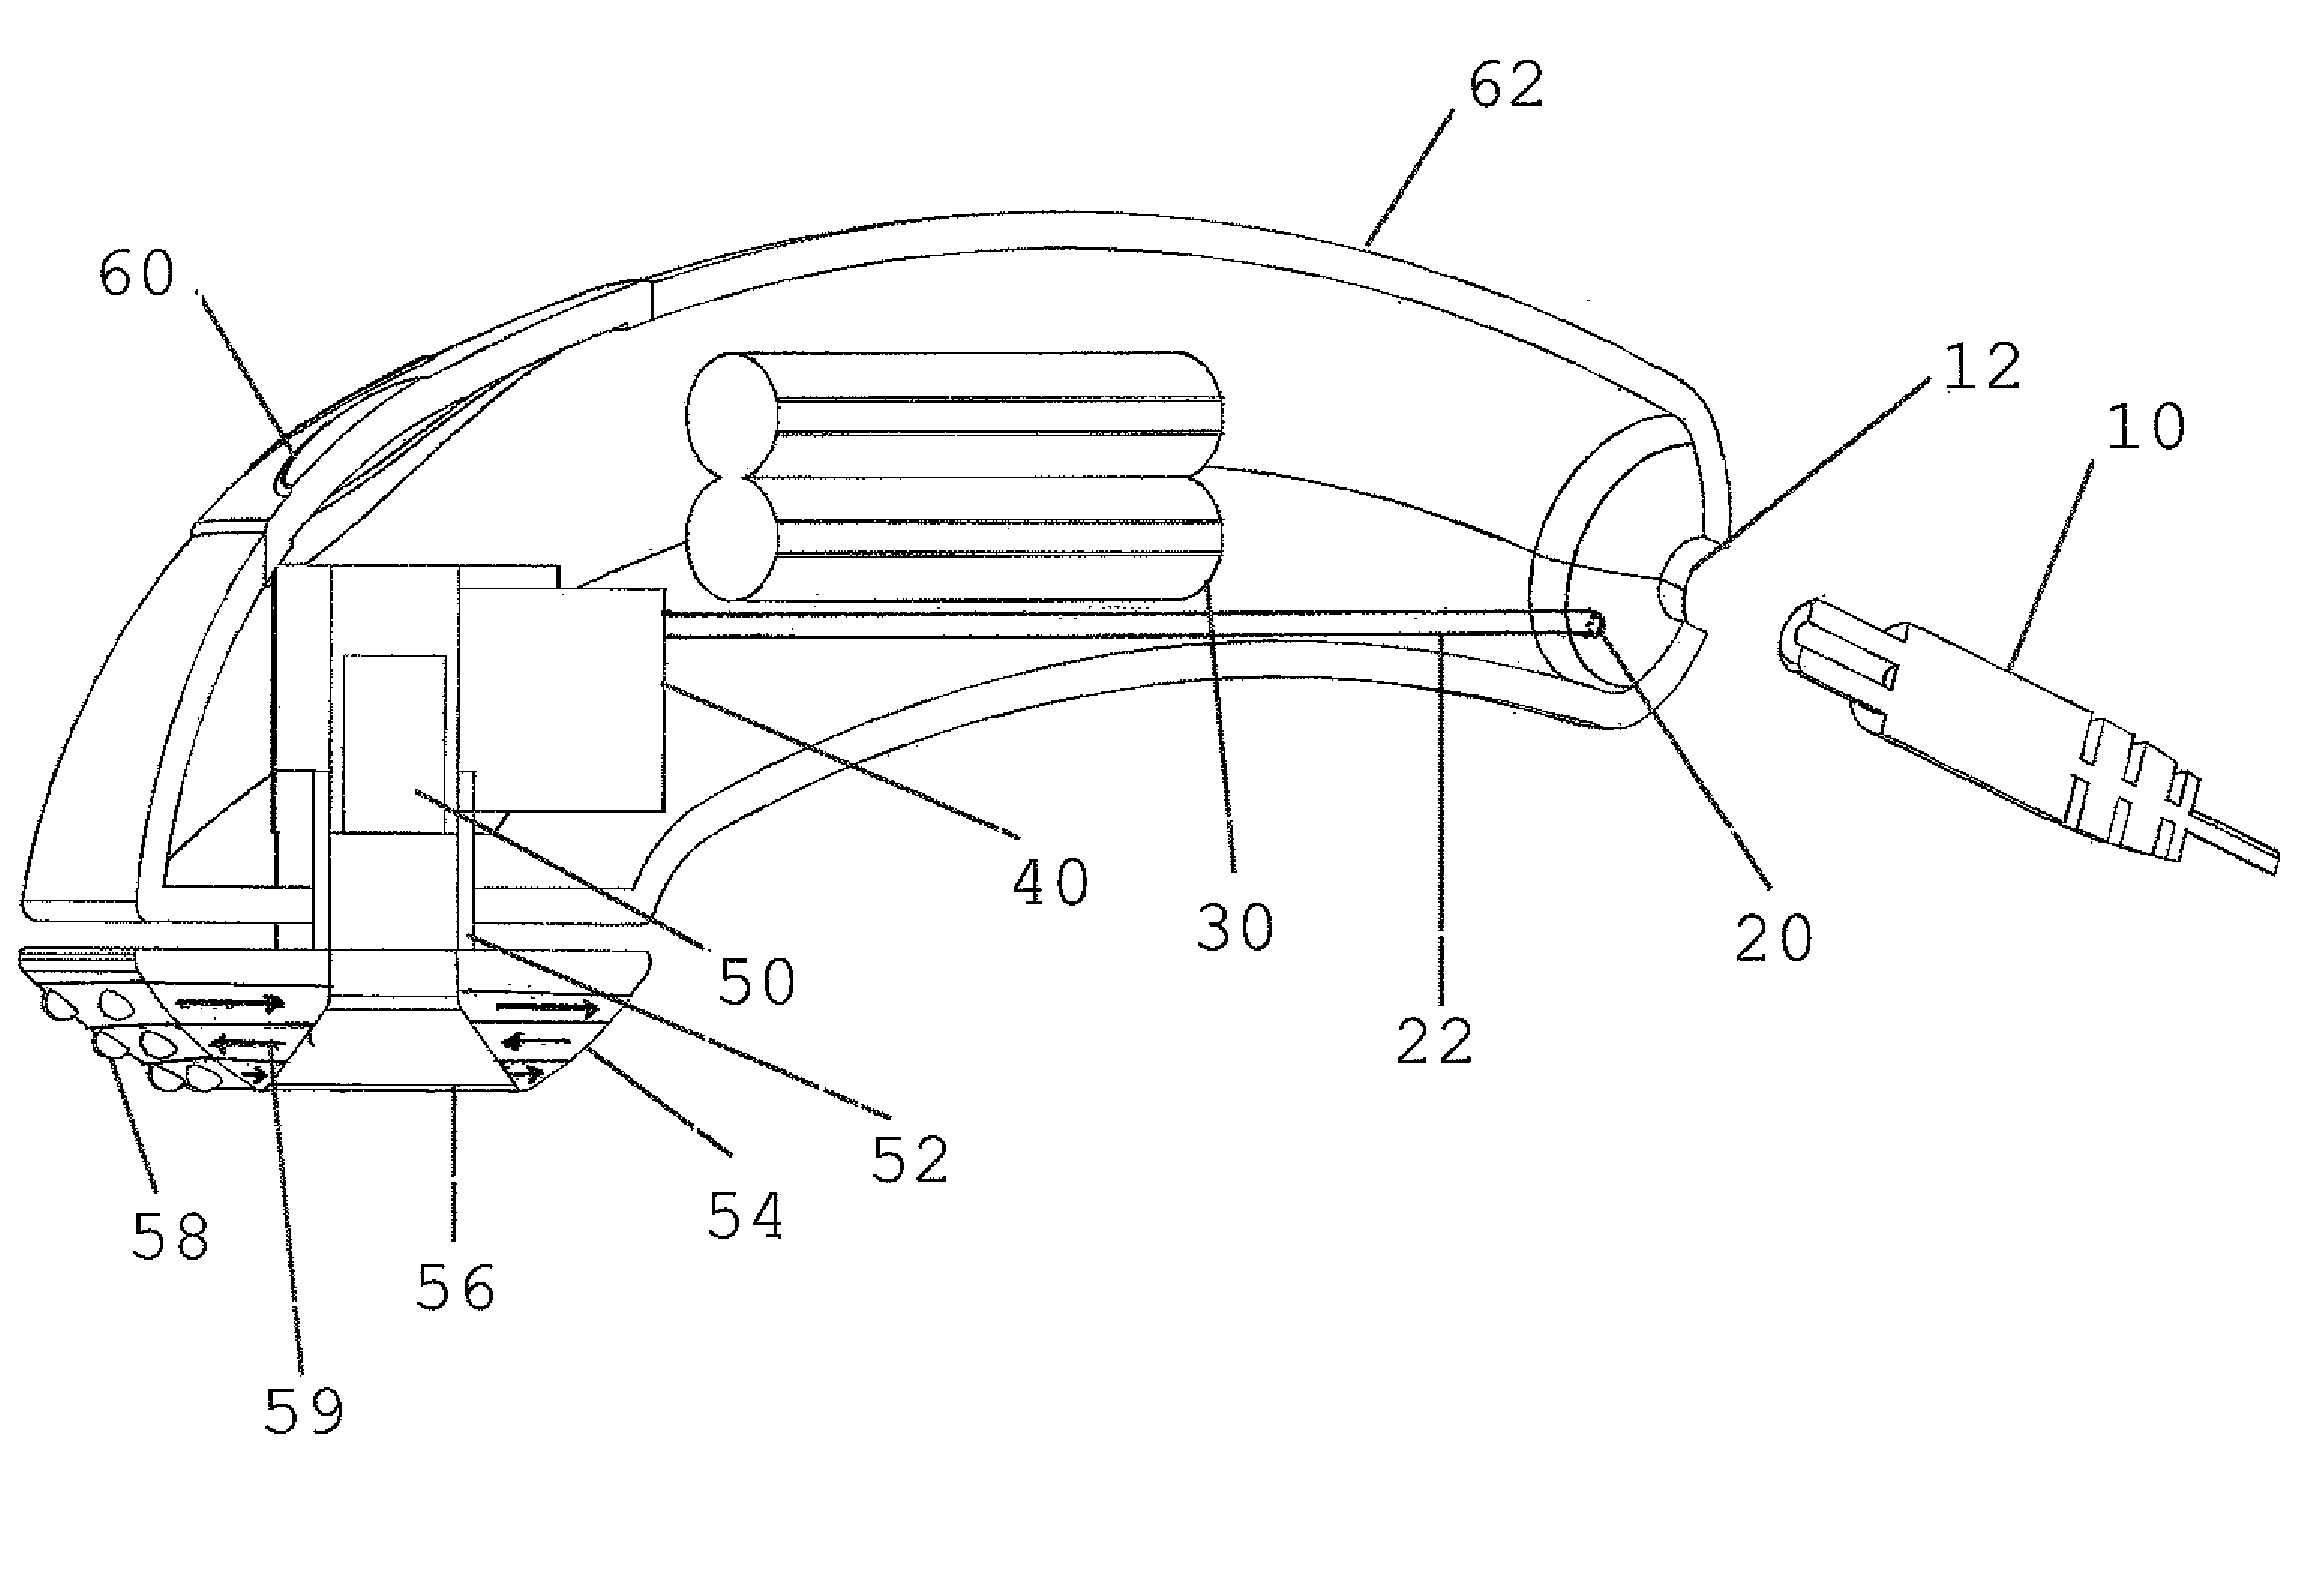 Therapeutic devices for the treatment of various conditions of a female individual